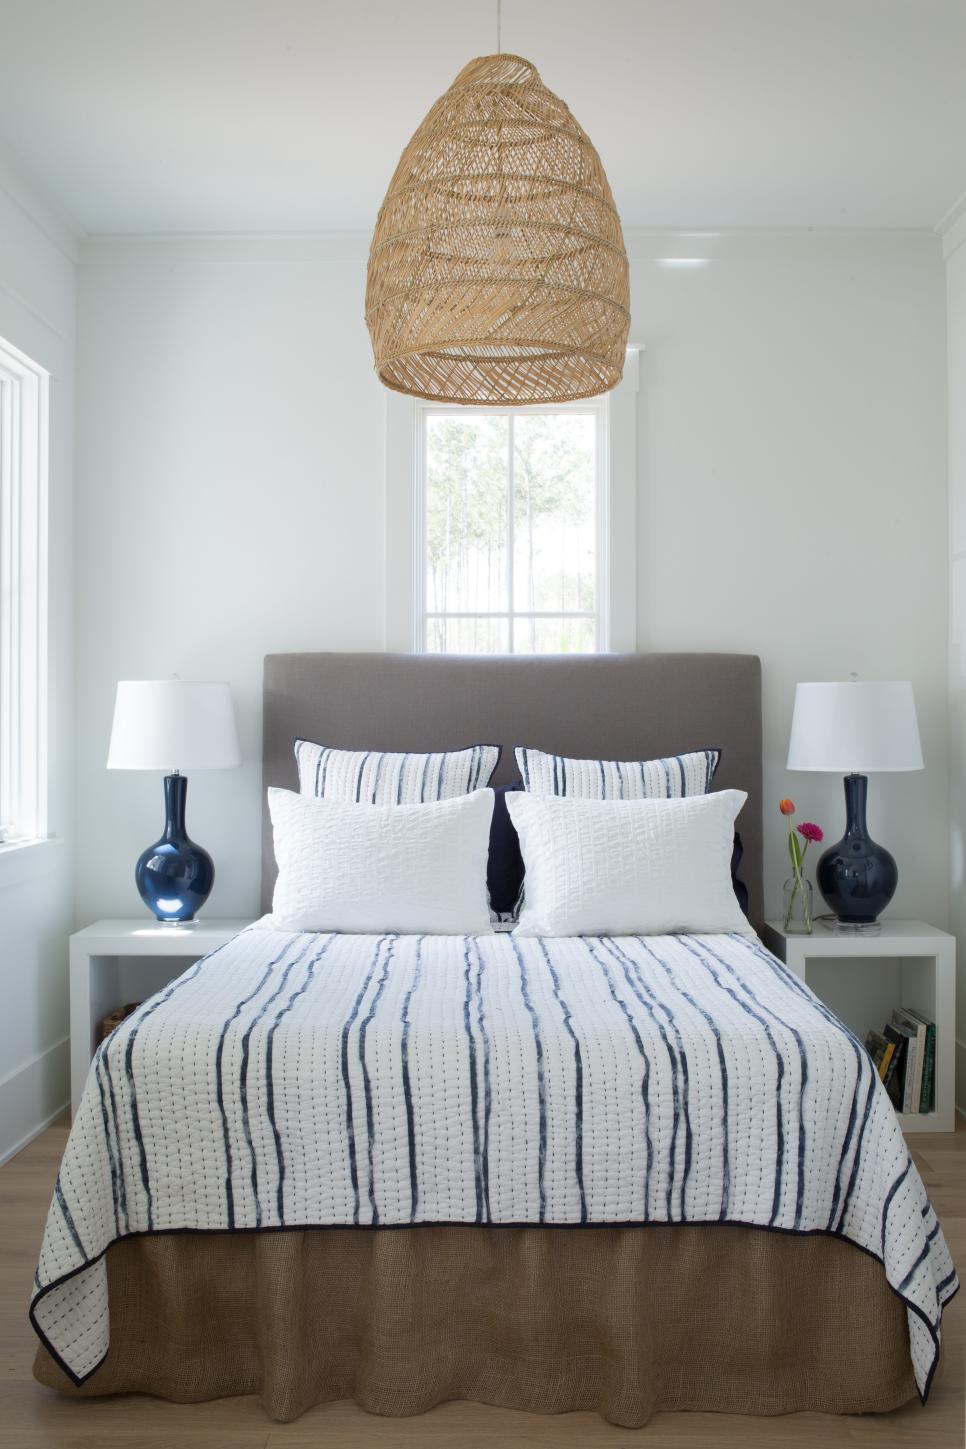 White Cottage Guest Bedroom With Upholstered Headboard And Natural